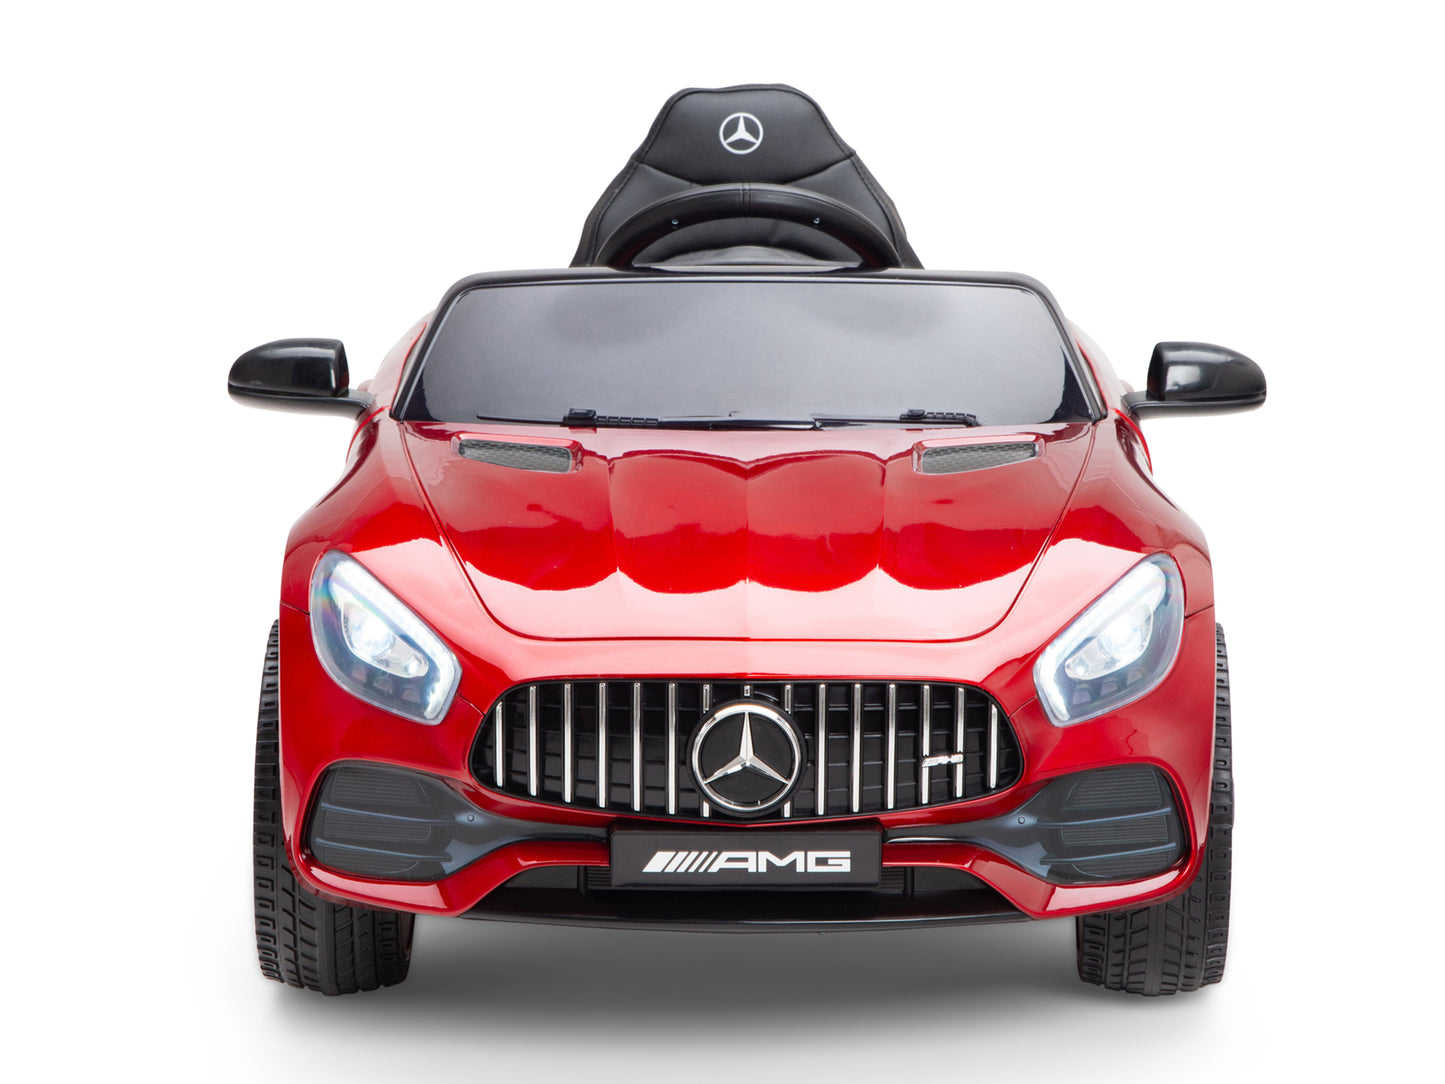 Mercedes-AMG GT Coupe 12V Battery Operated Ride On Car with Remote Control - Red